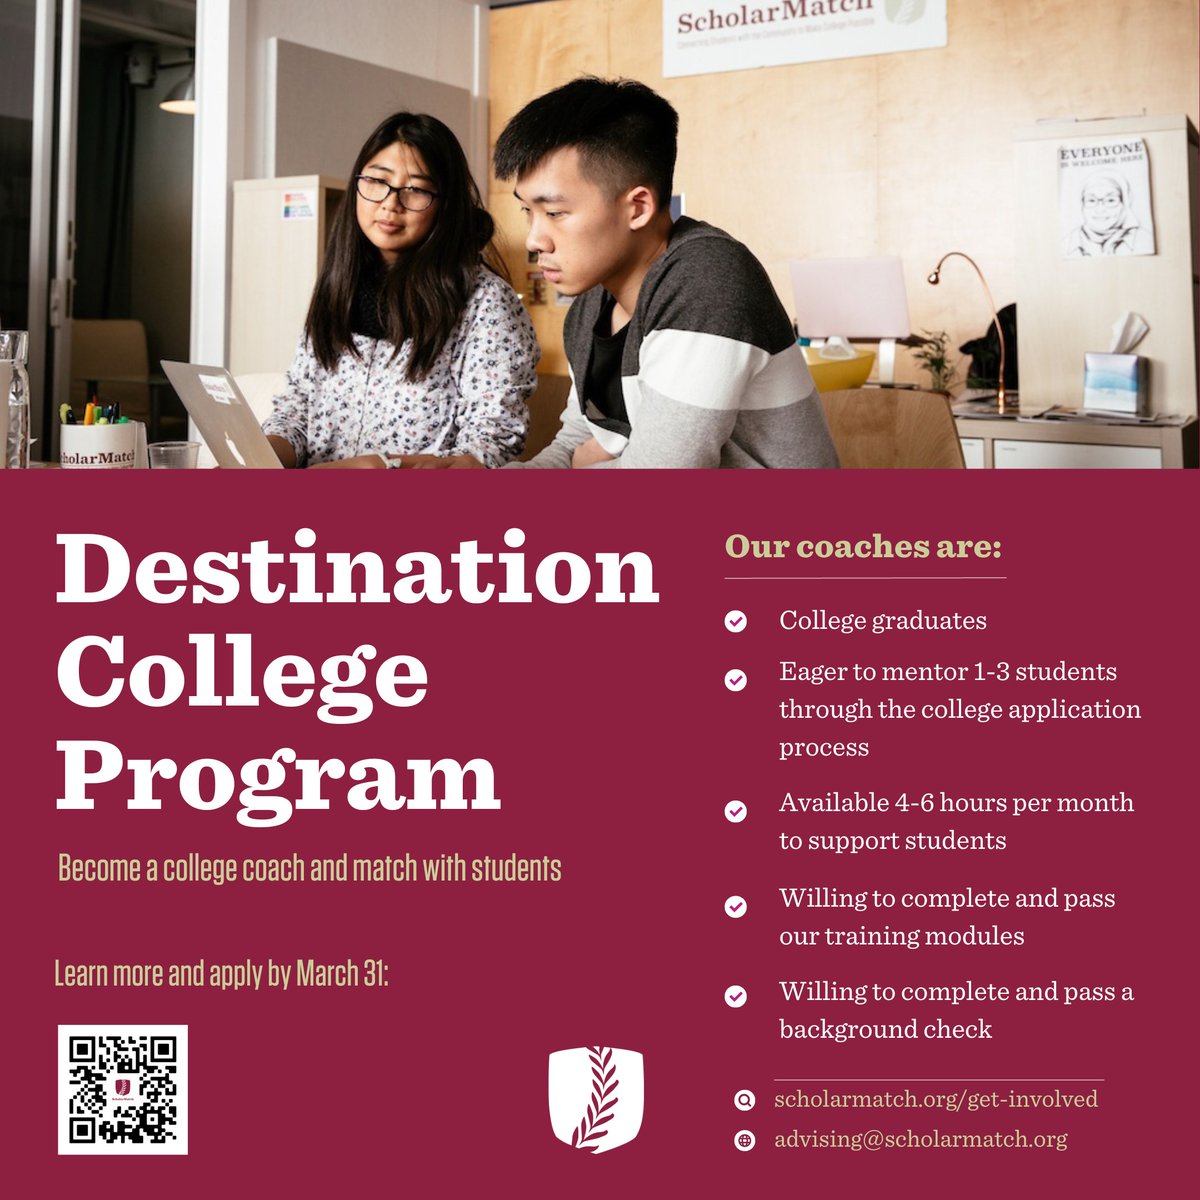 Last call to join our Destination College program as a college coach! If you're interested in mentoring #firstgen students through the #collegeapp process, head over to our website and apply by March 31! scholarmatch.org/get-involved/c…
#CollegeAdvisor #firstgen